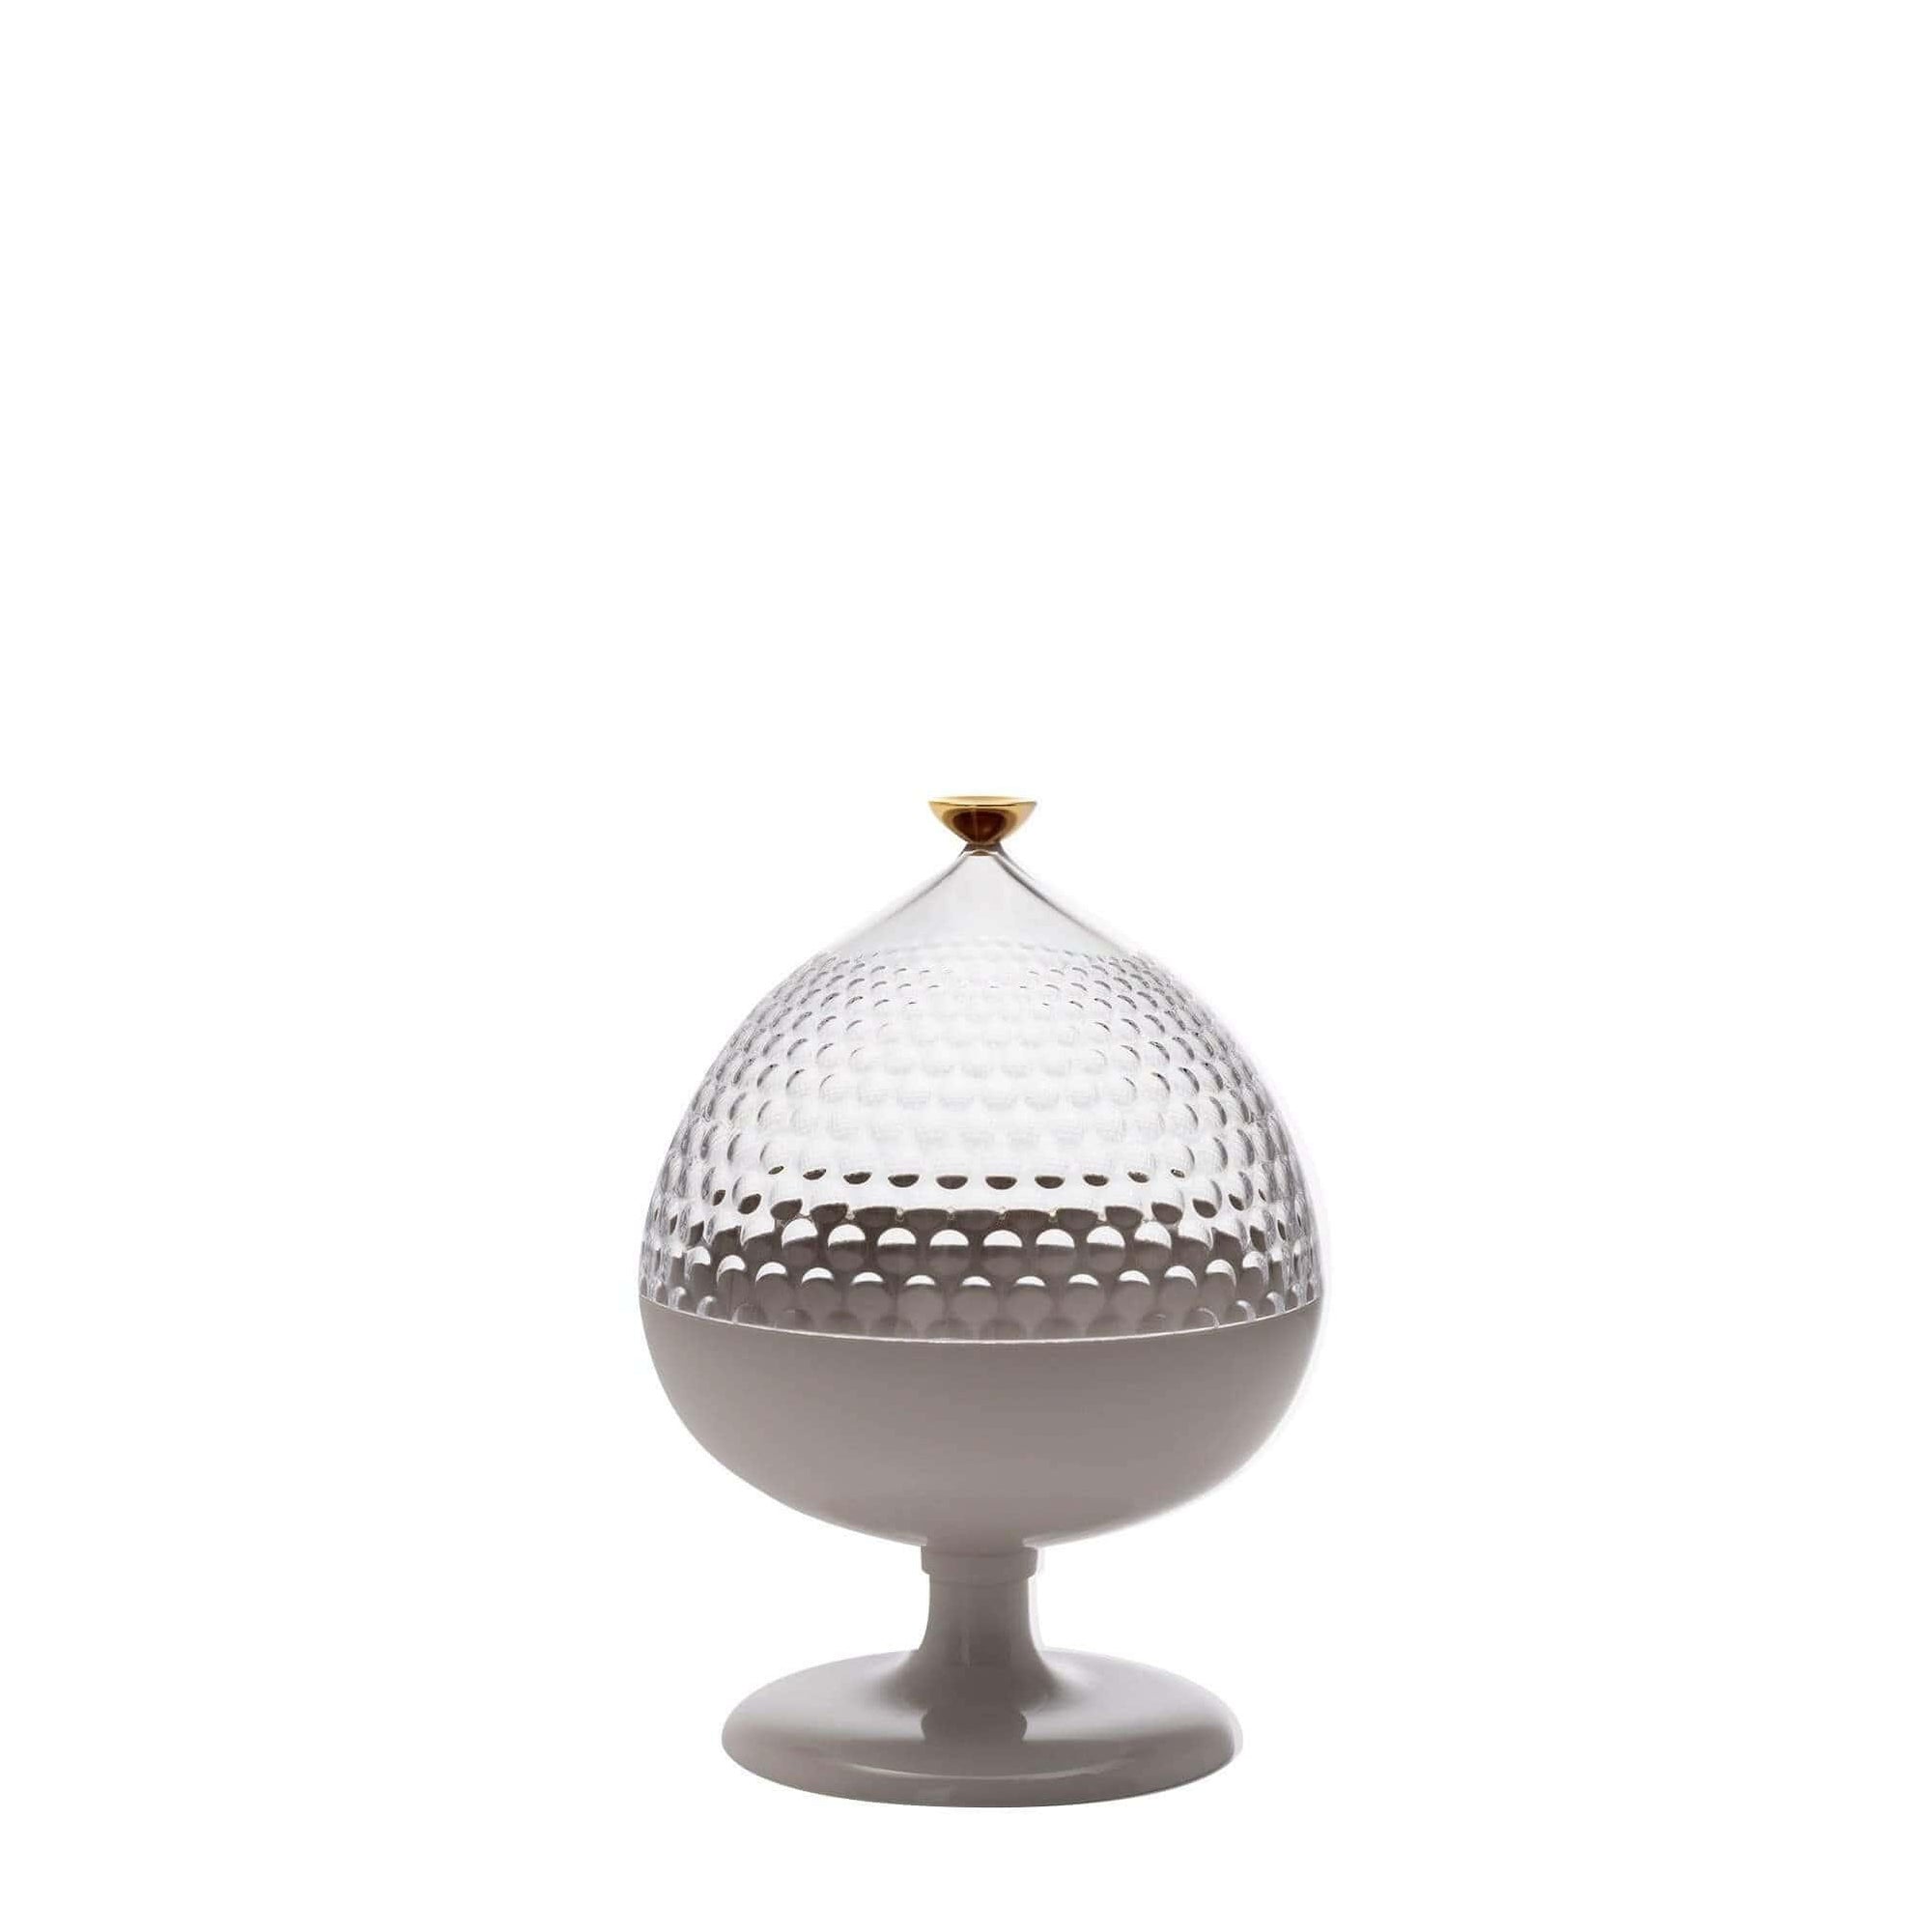 Pumo Candy Dish - Curated - Accessory - Kartell